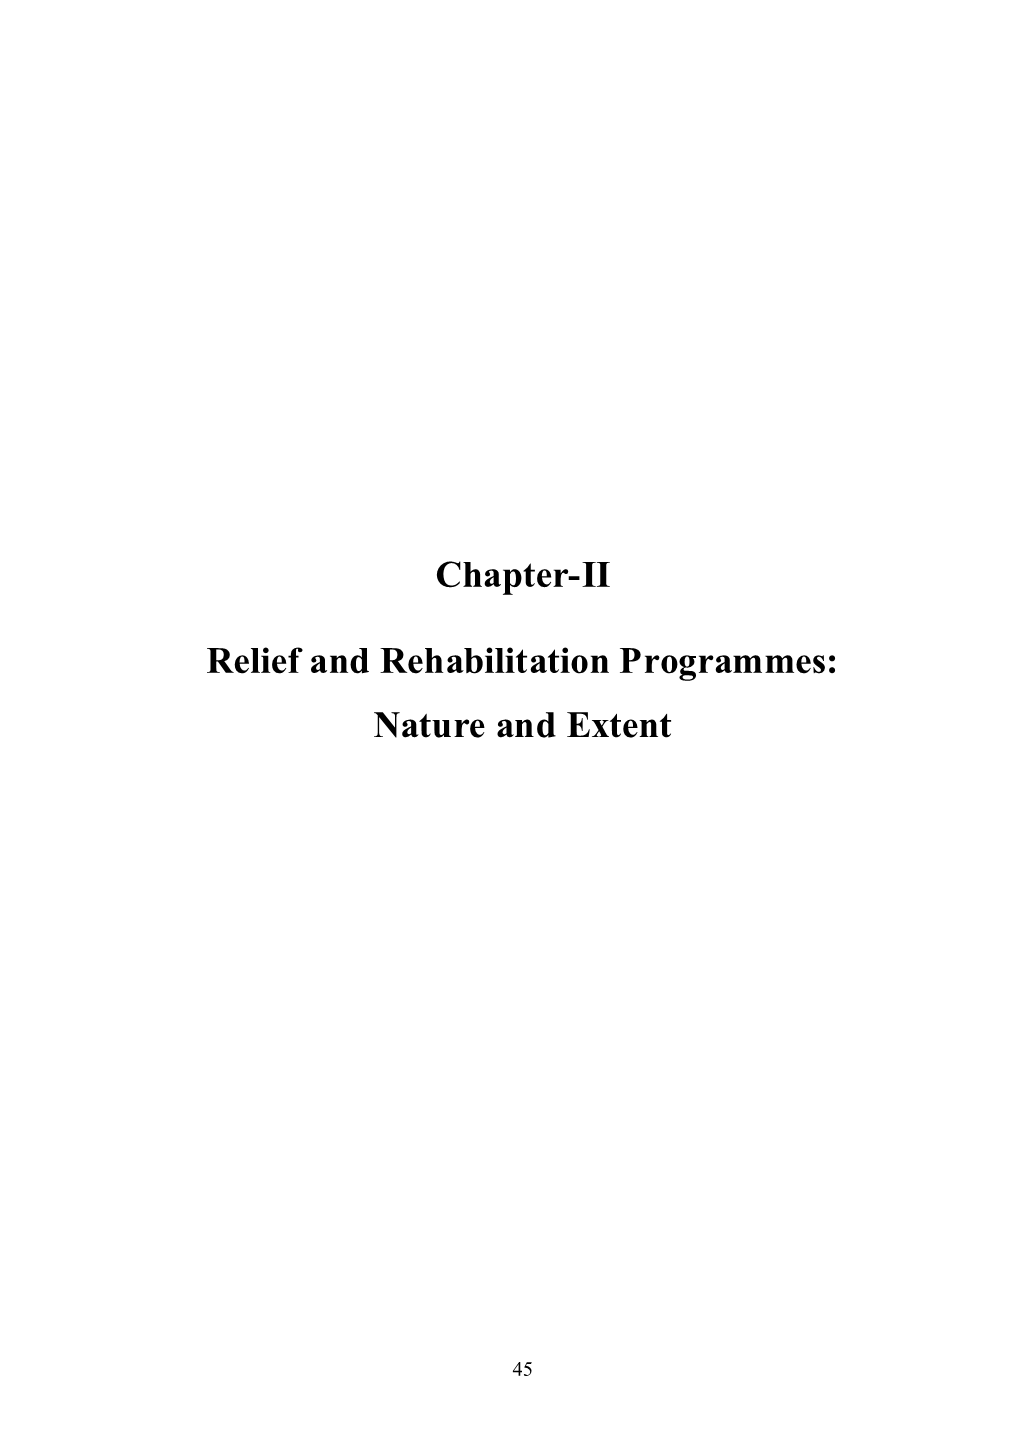 Chapter-II Relief and Rehabilitation Programmes